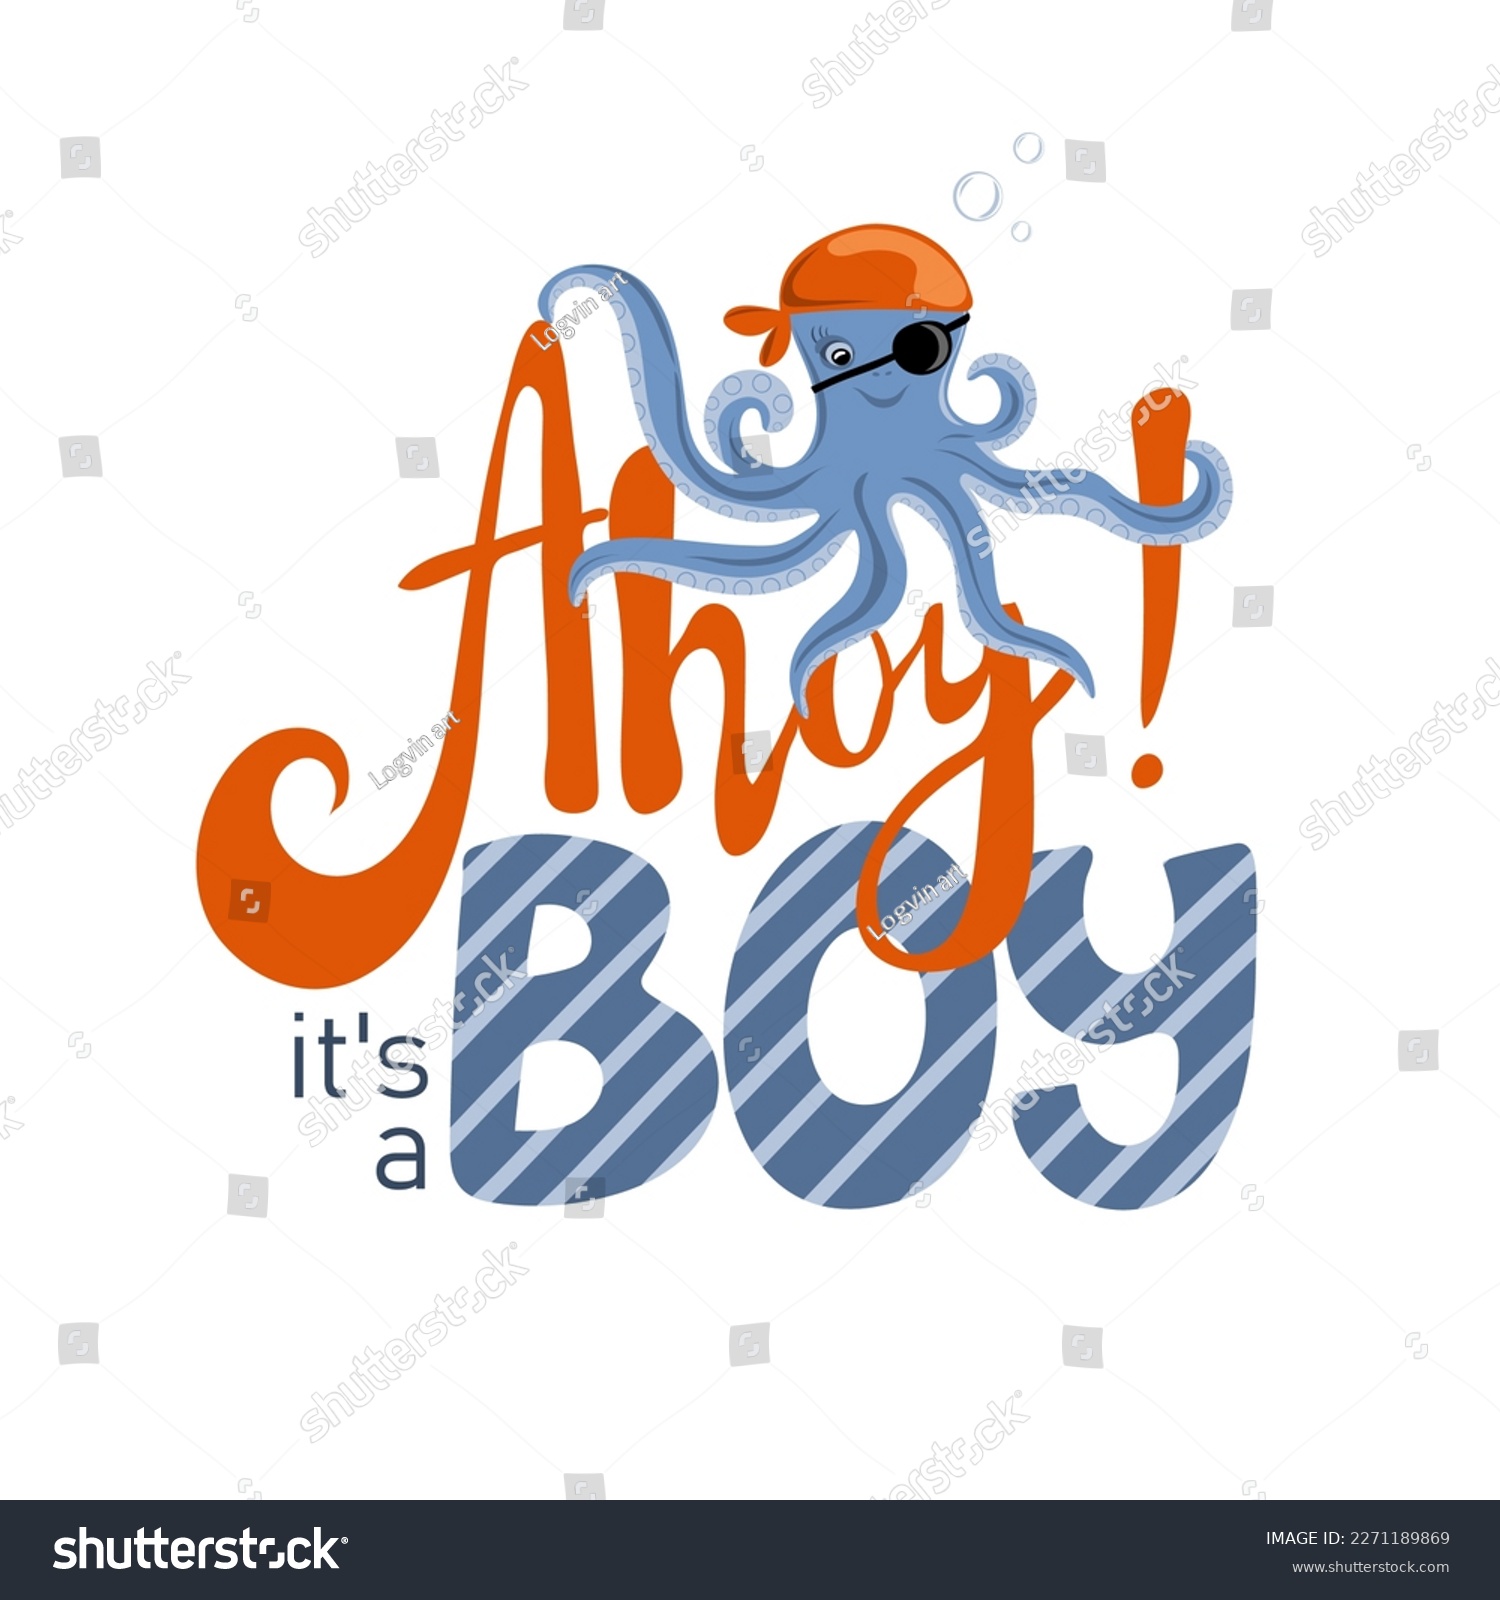 SVG of Ahoy its a boy. Inspiration phrase with octopus pirate. Baby shower design template for boys birthday in marine style. Vector illustration svg